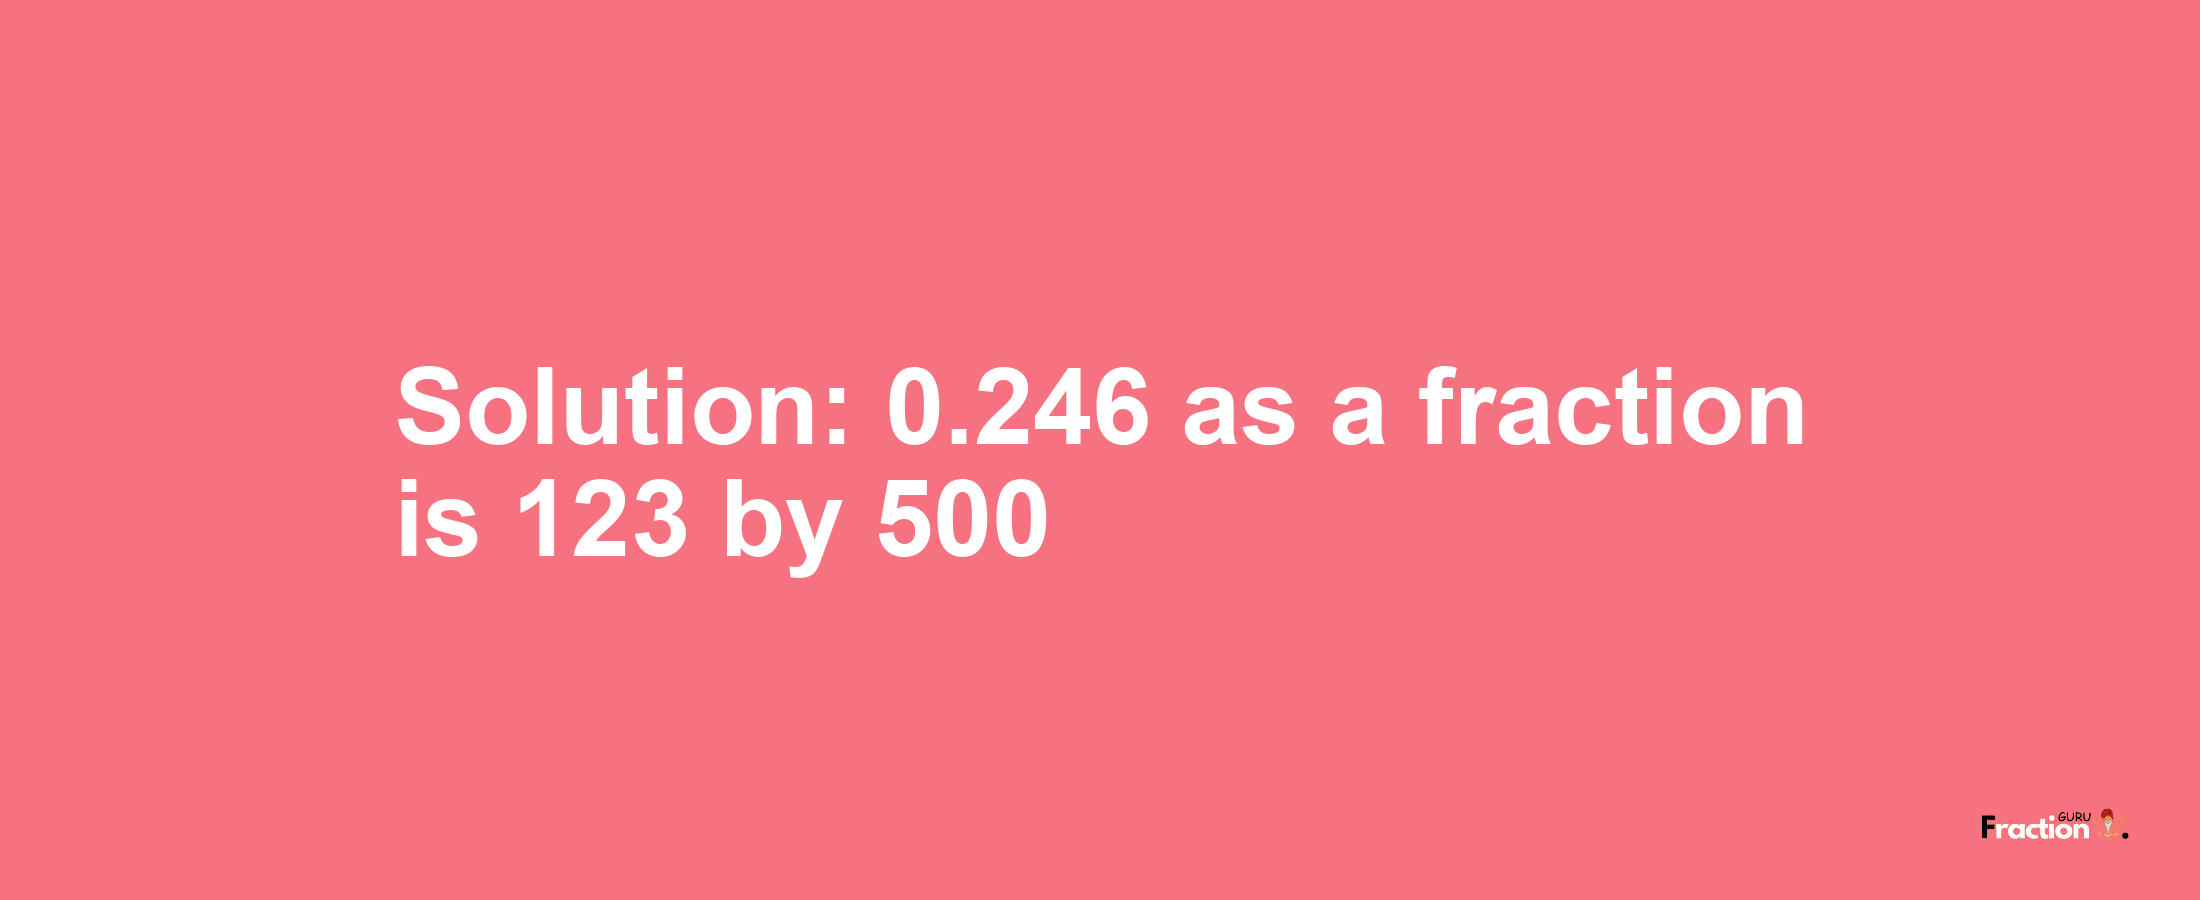 Solution:0.246 as a fraction is 123/500